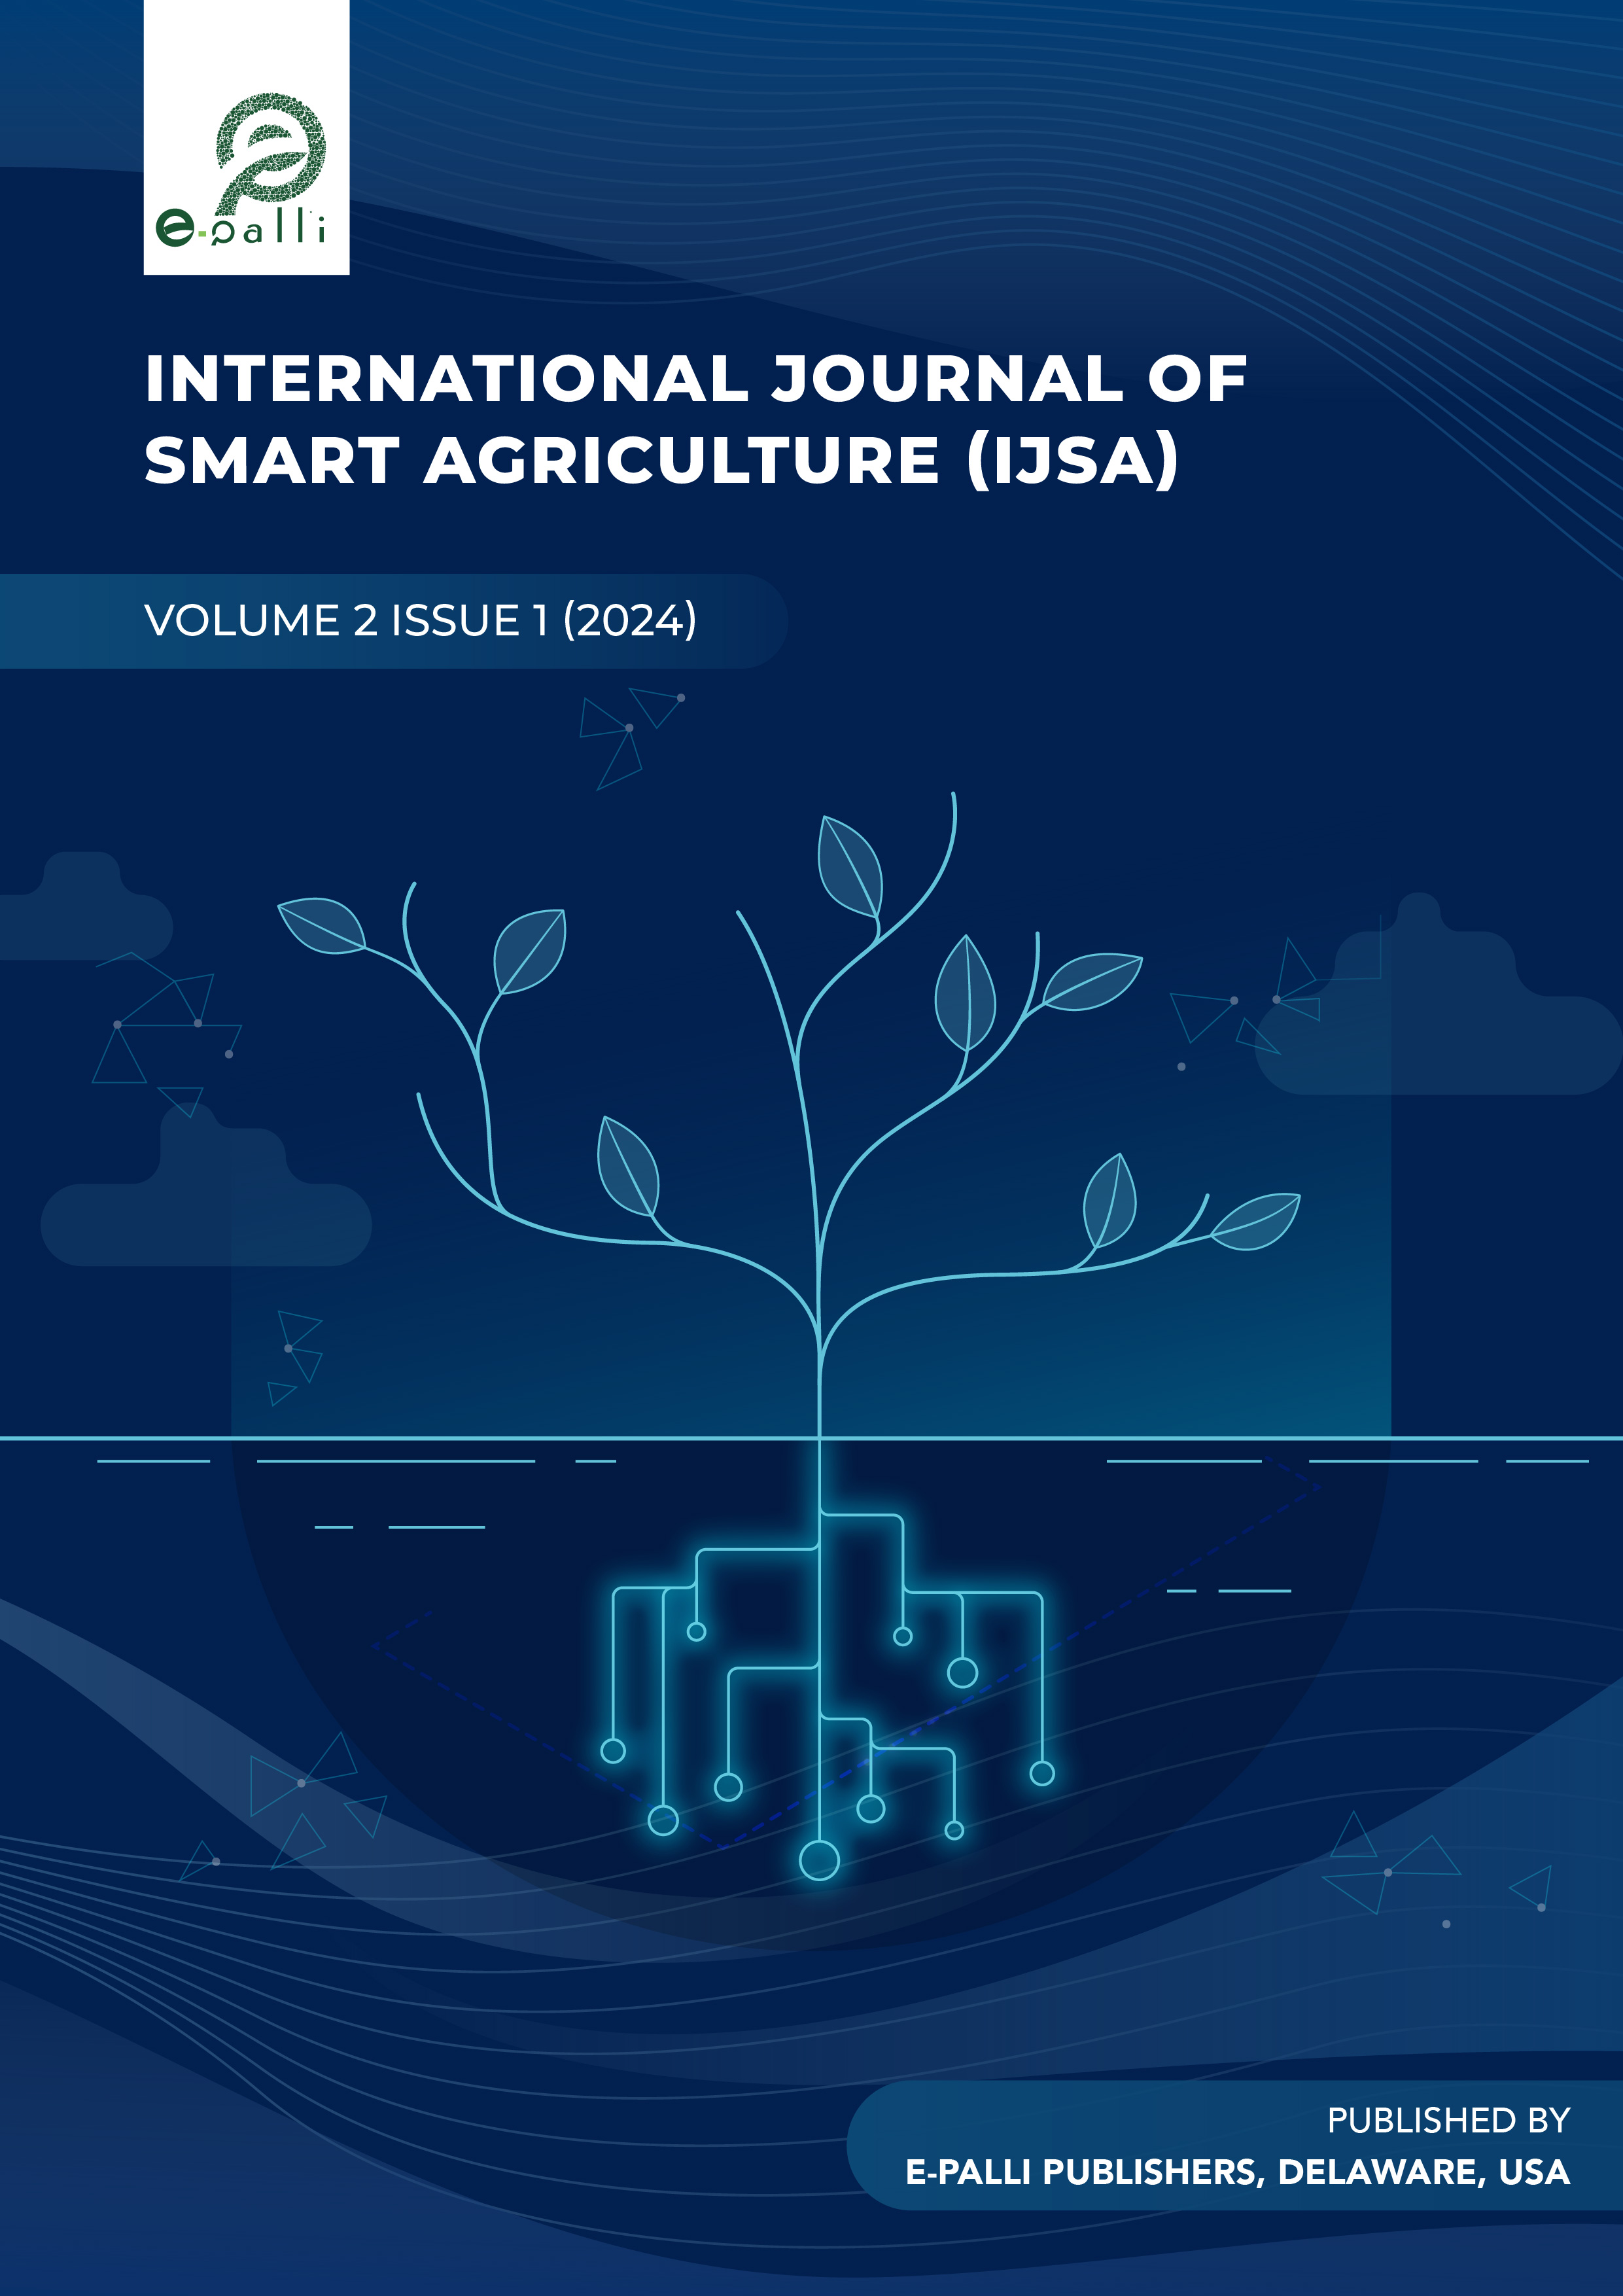 					View Vol. 2 No. 1 (2024): International Journal of Smart Agriculture
				